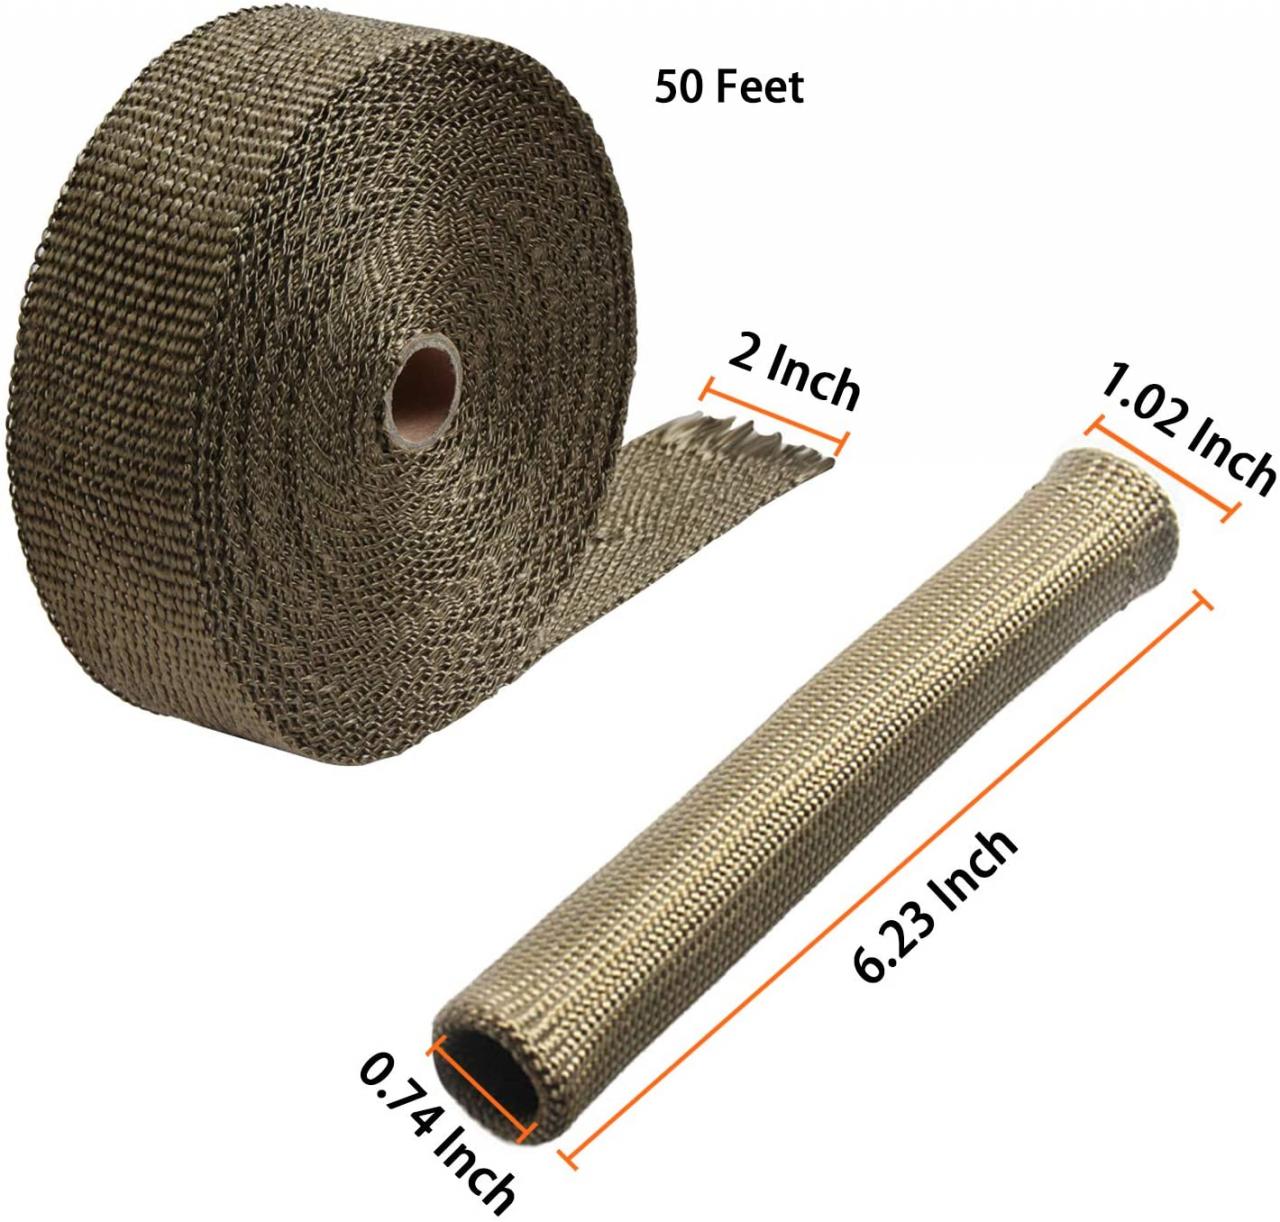 Buy Exhaust Wrap LIBERRWAY Header Wrap Exhaust Heat Wrap for Exhaust Pipes  Tap Kit for Car Motorcycle, 2x50ft with 10 Stainless Ties and Gloves Online  in Hong Kong. B07DFF3JCX